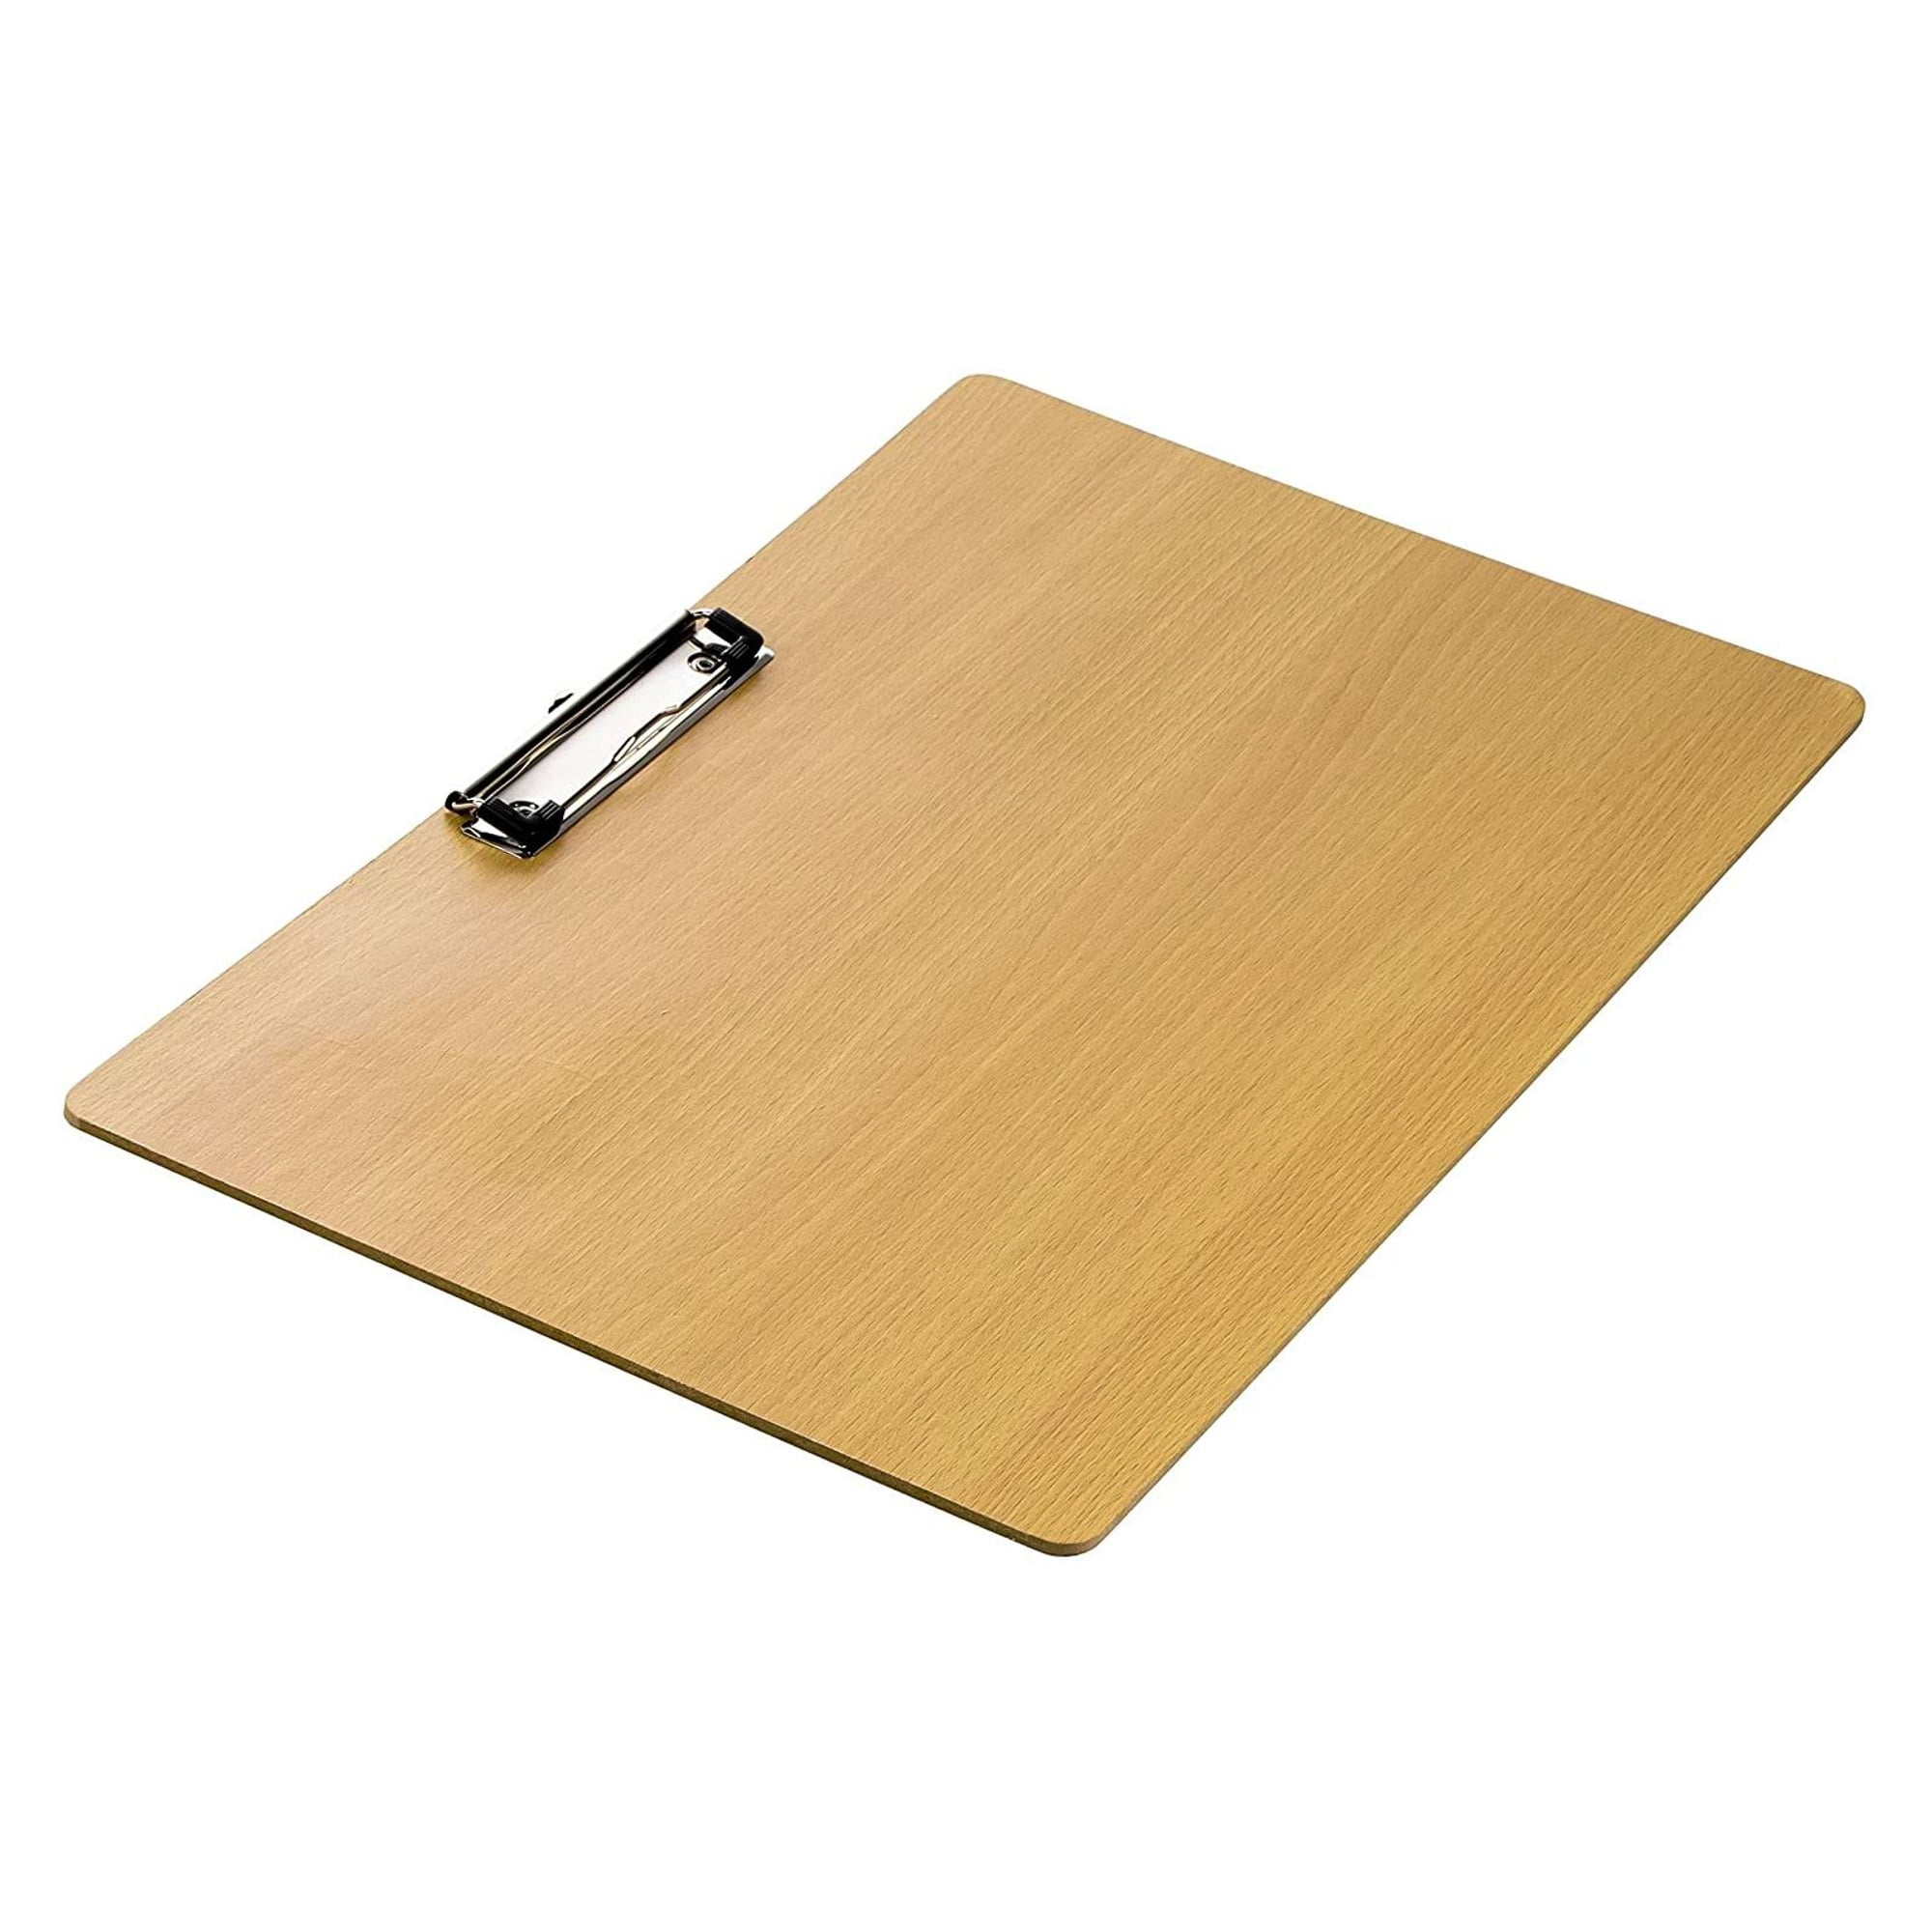 Drawing Board Clipboard Extra Large 12x18 Art Board, Engineer Field Board,  Architect Clipboard, Solid Cherry Wood Free Shipping 